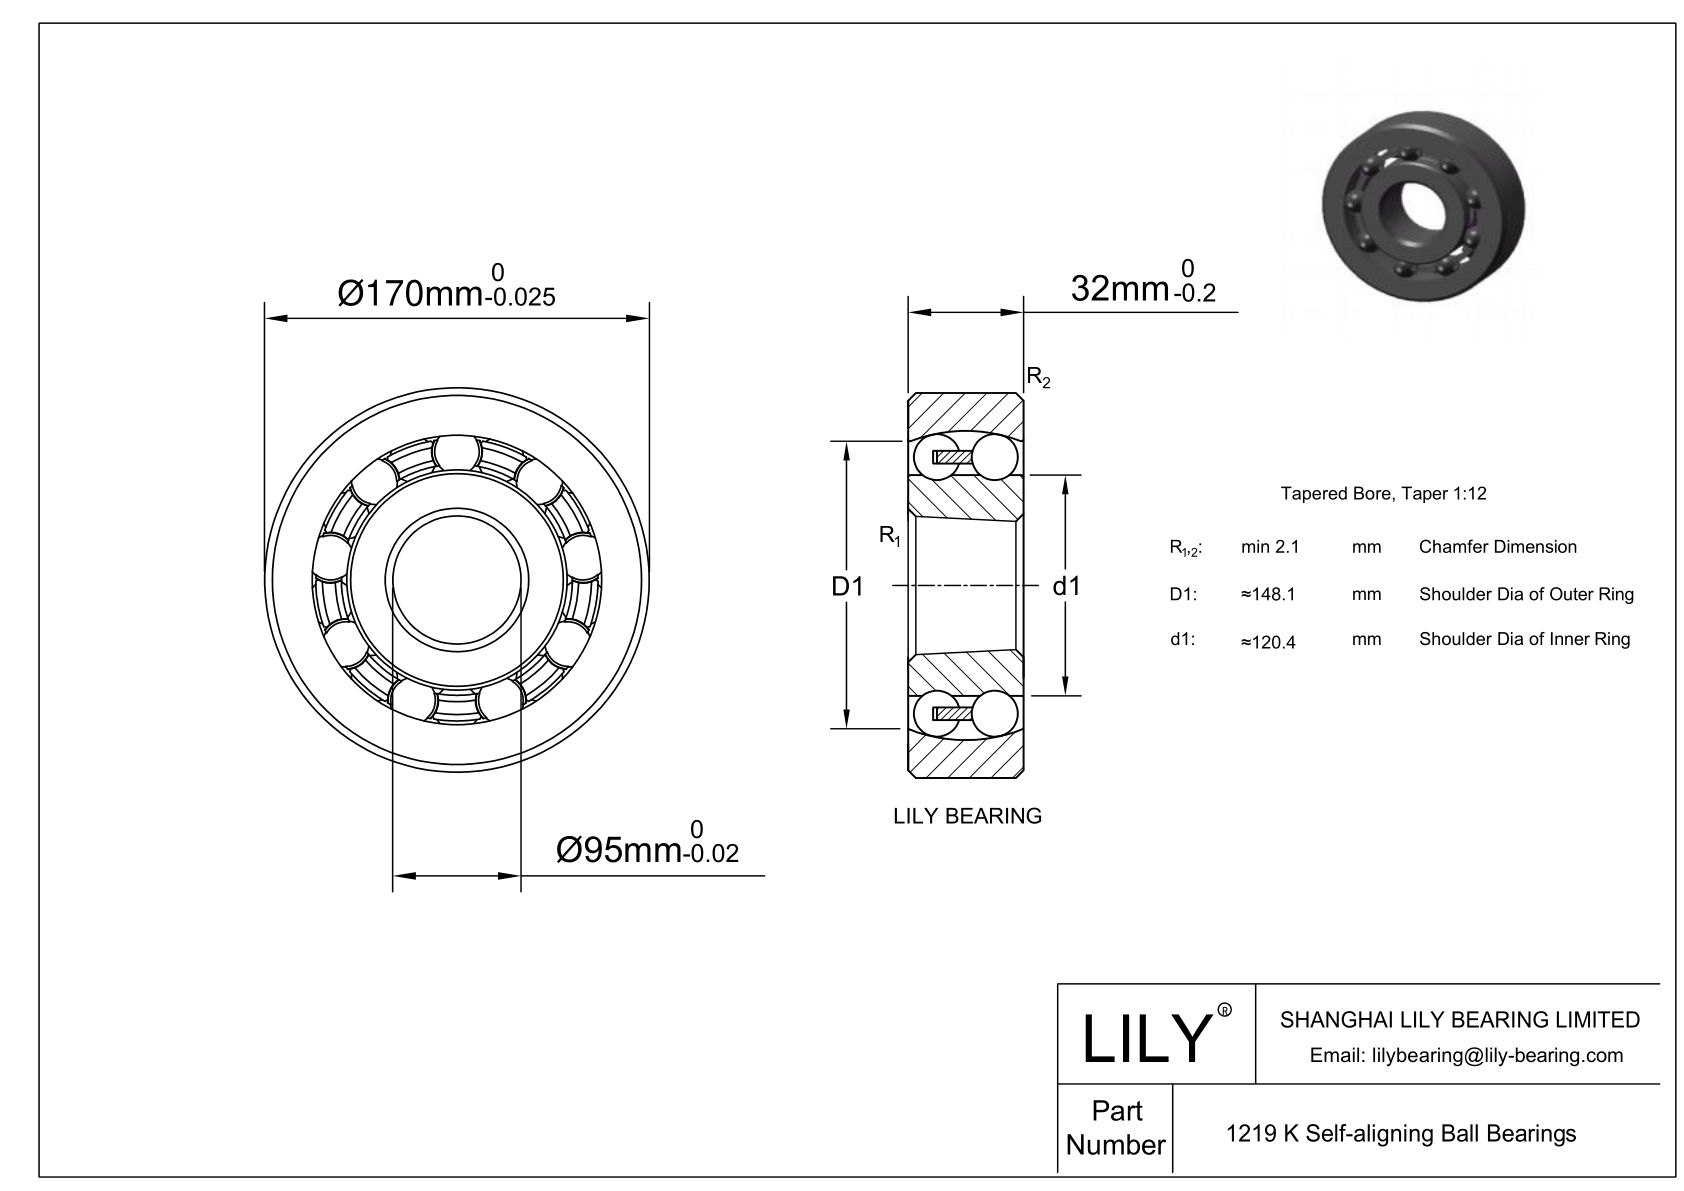 S1219 K Stainless Steel Self Aligning Ball Bearings cad drawing